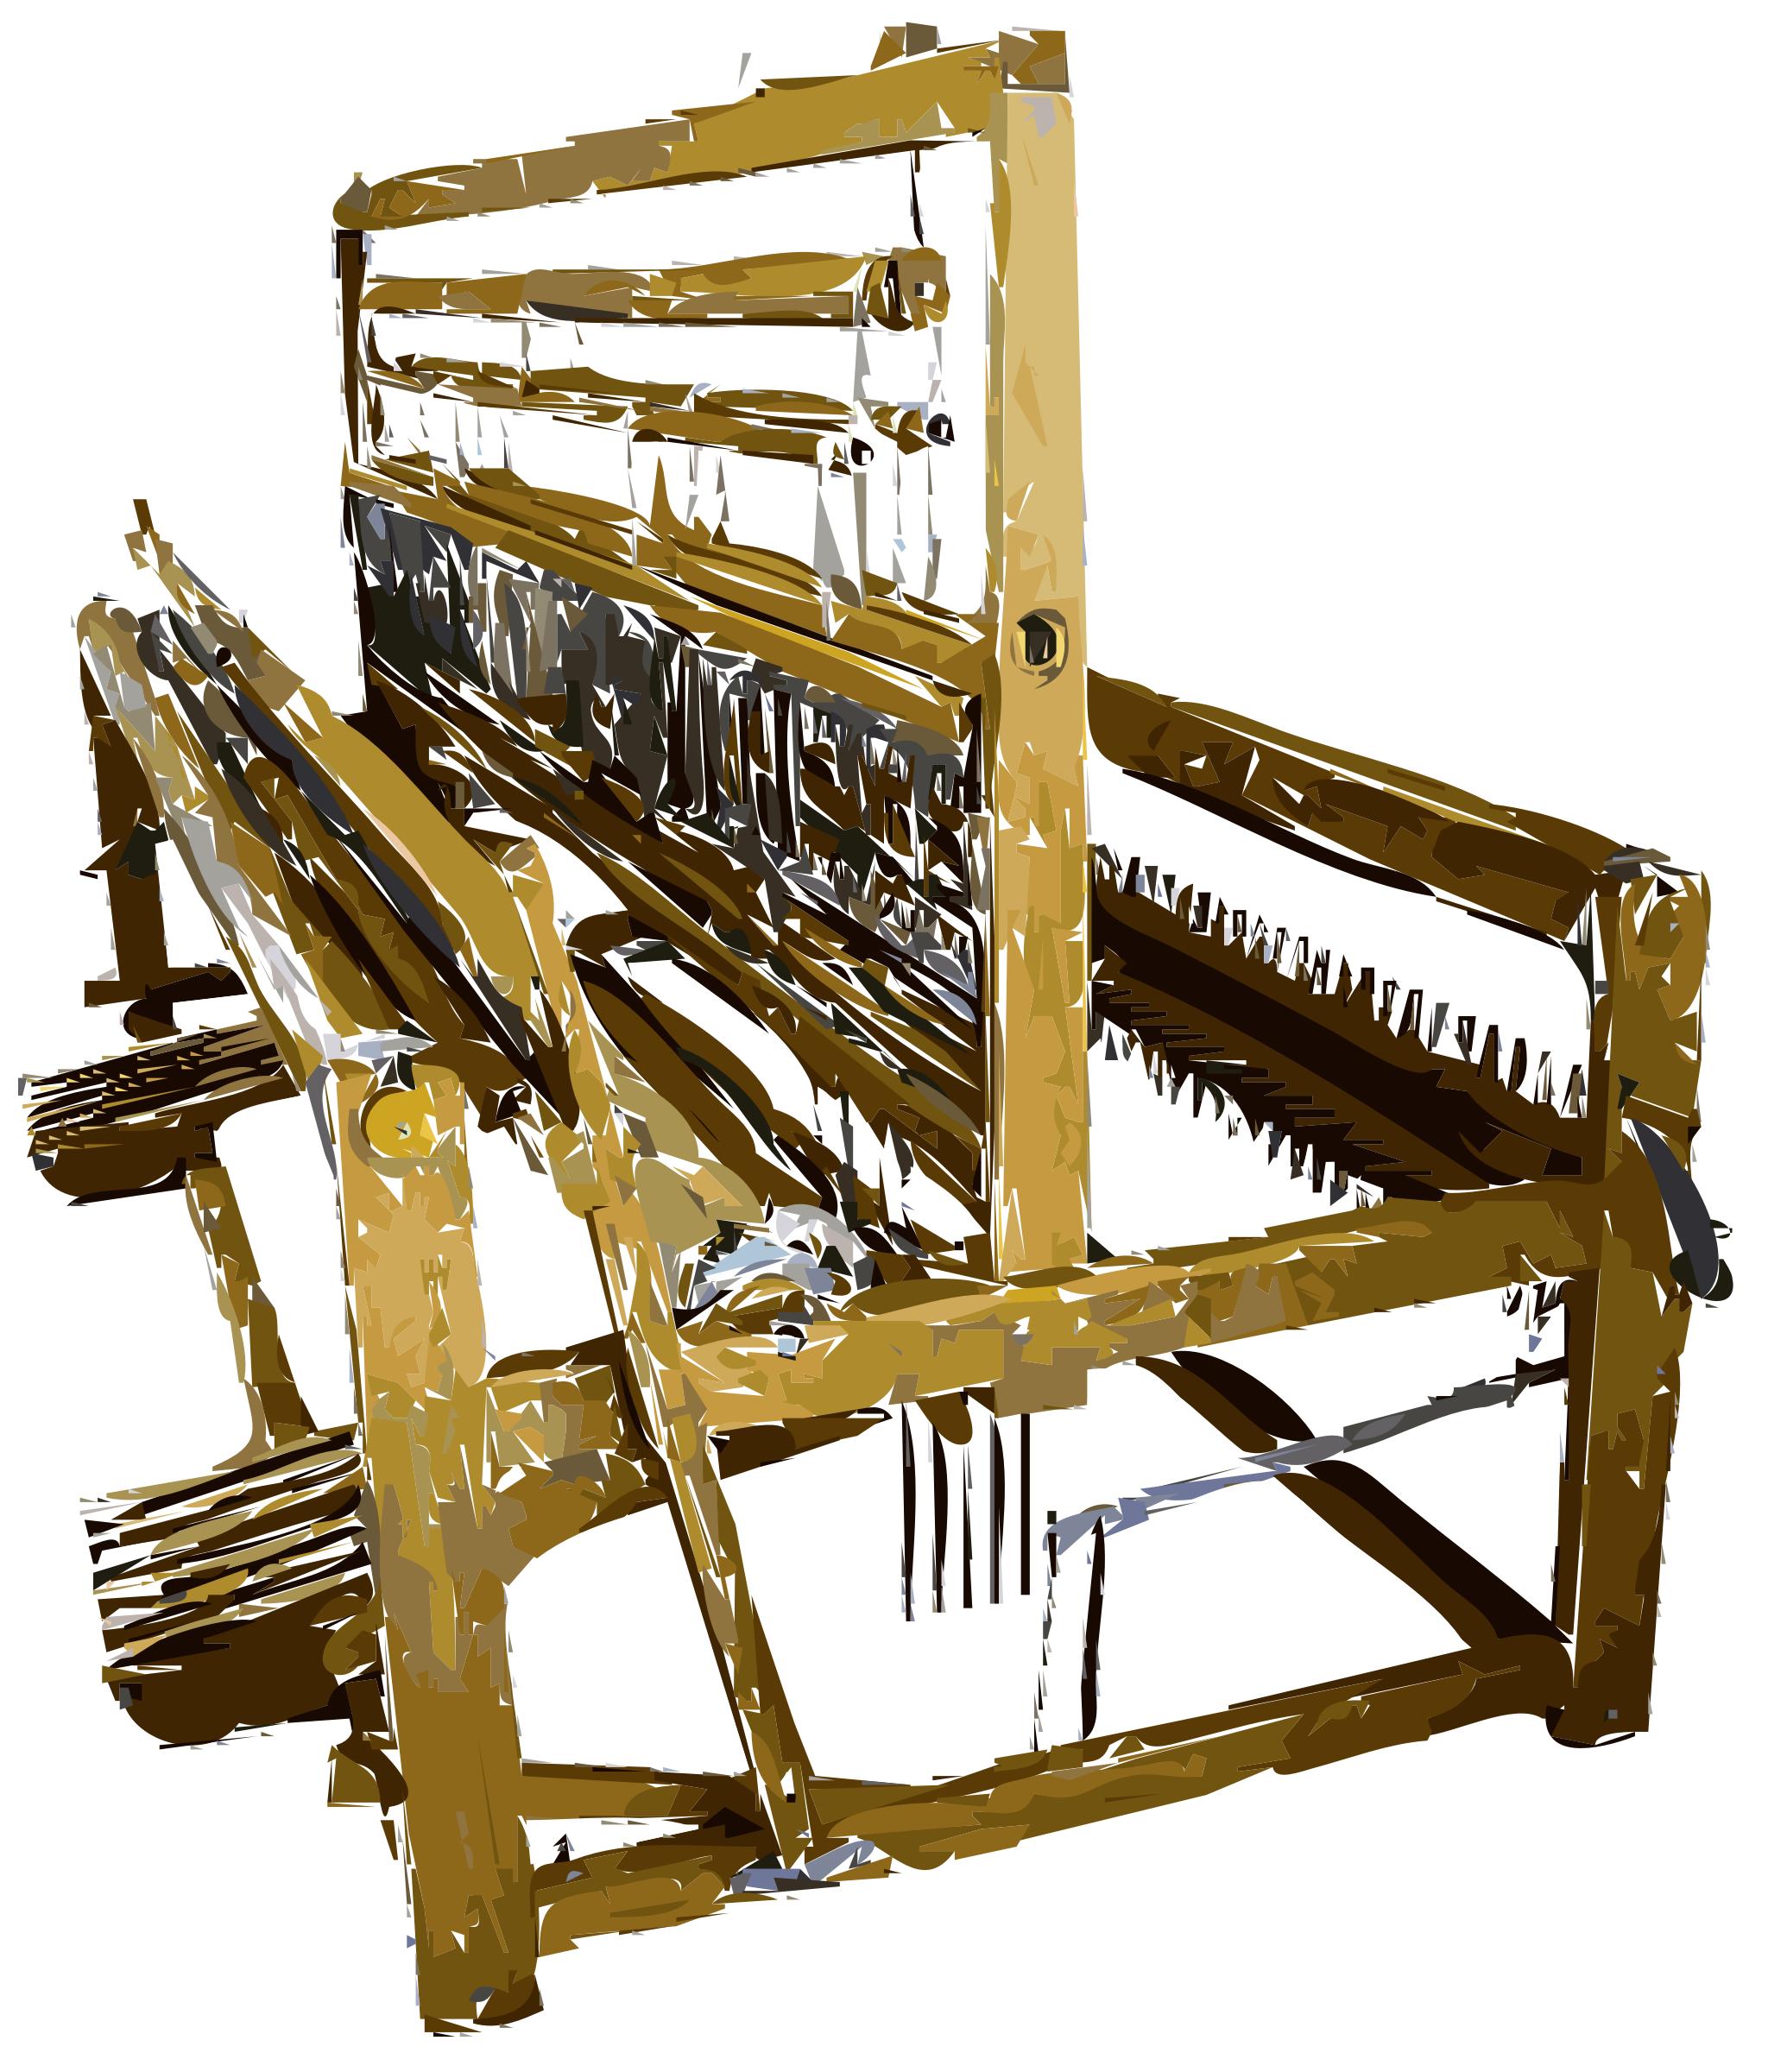 Old Fashioned Fabric Loom Vectorized png